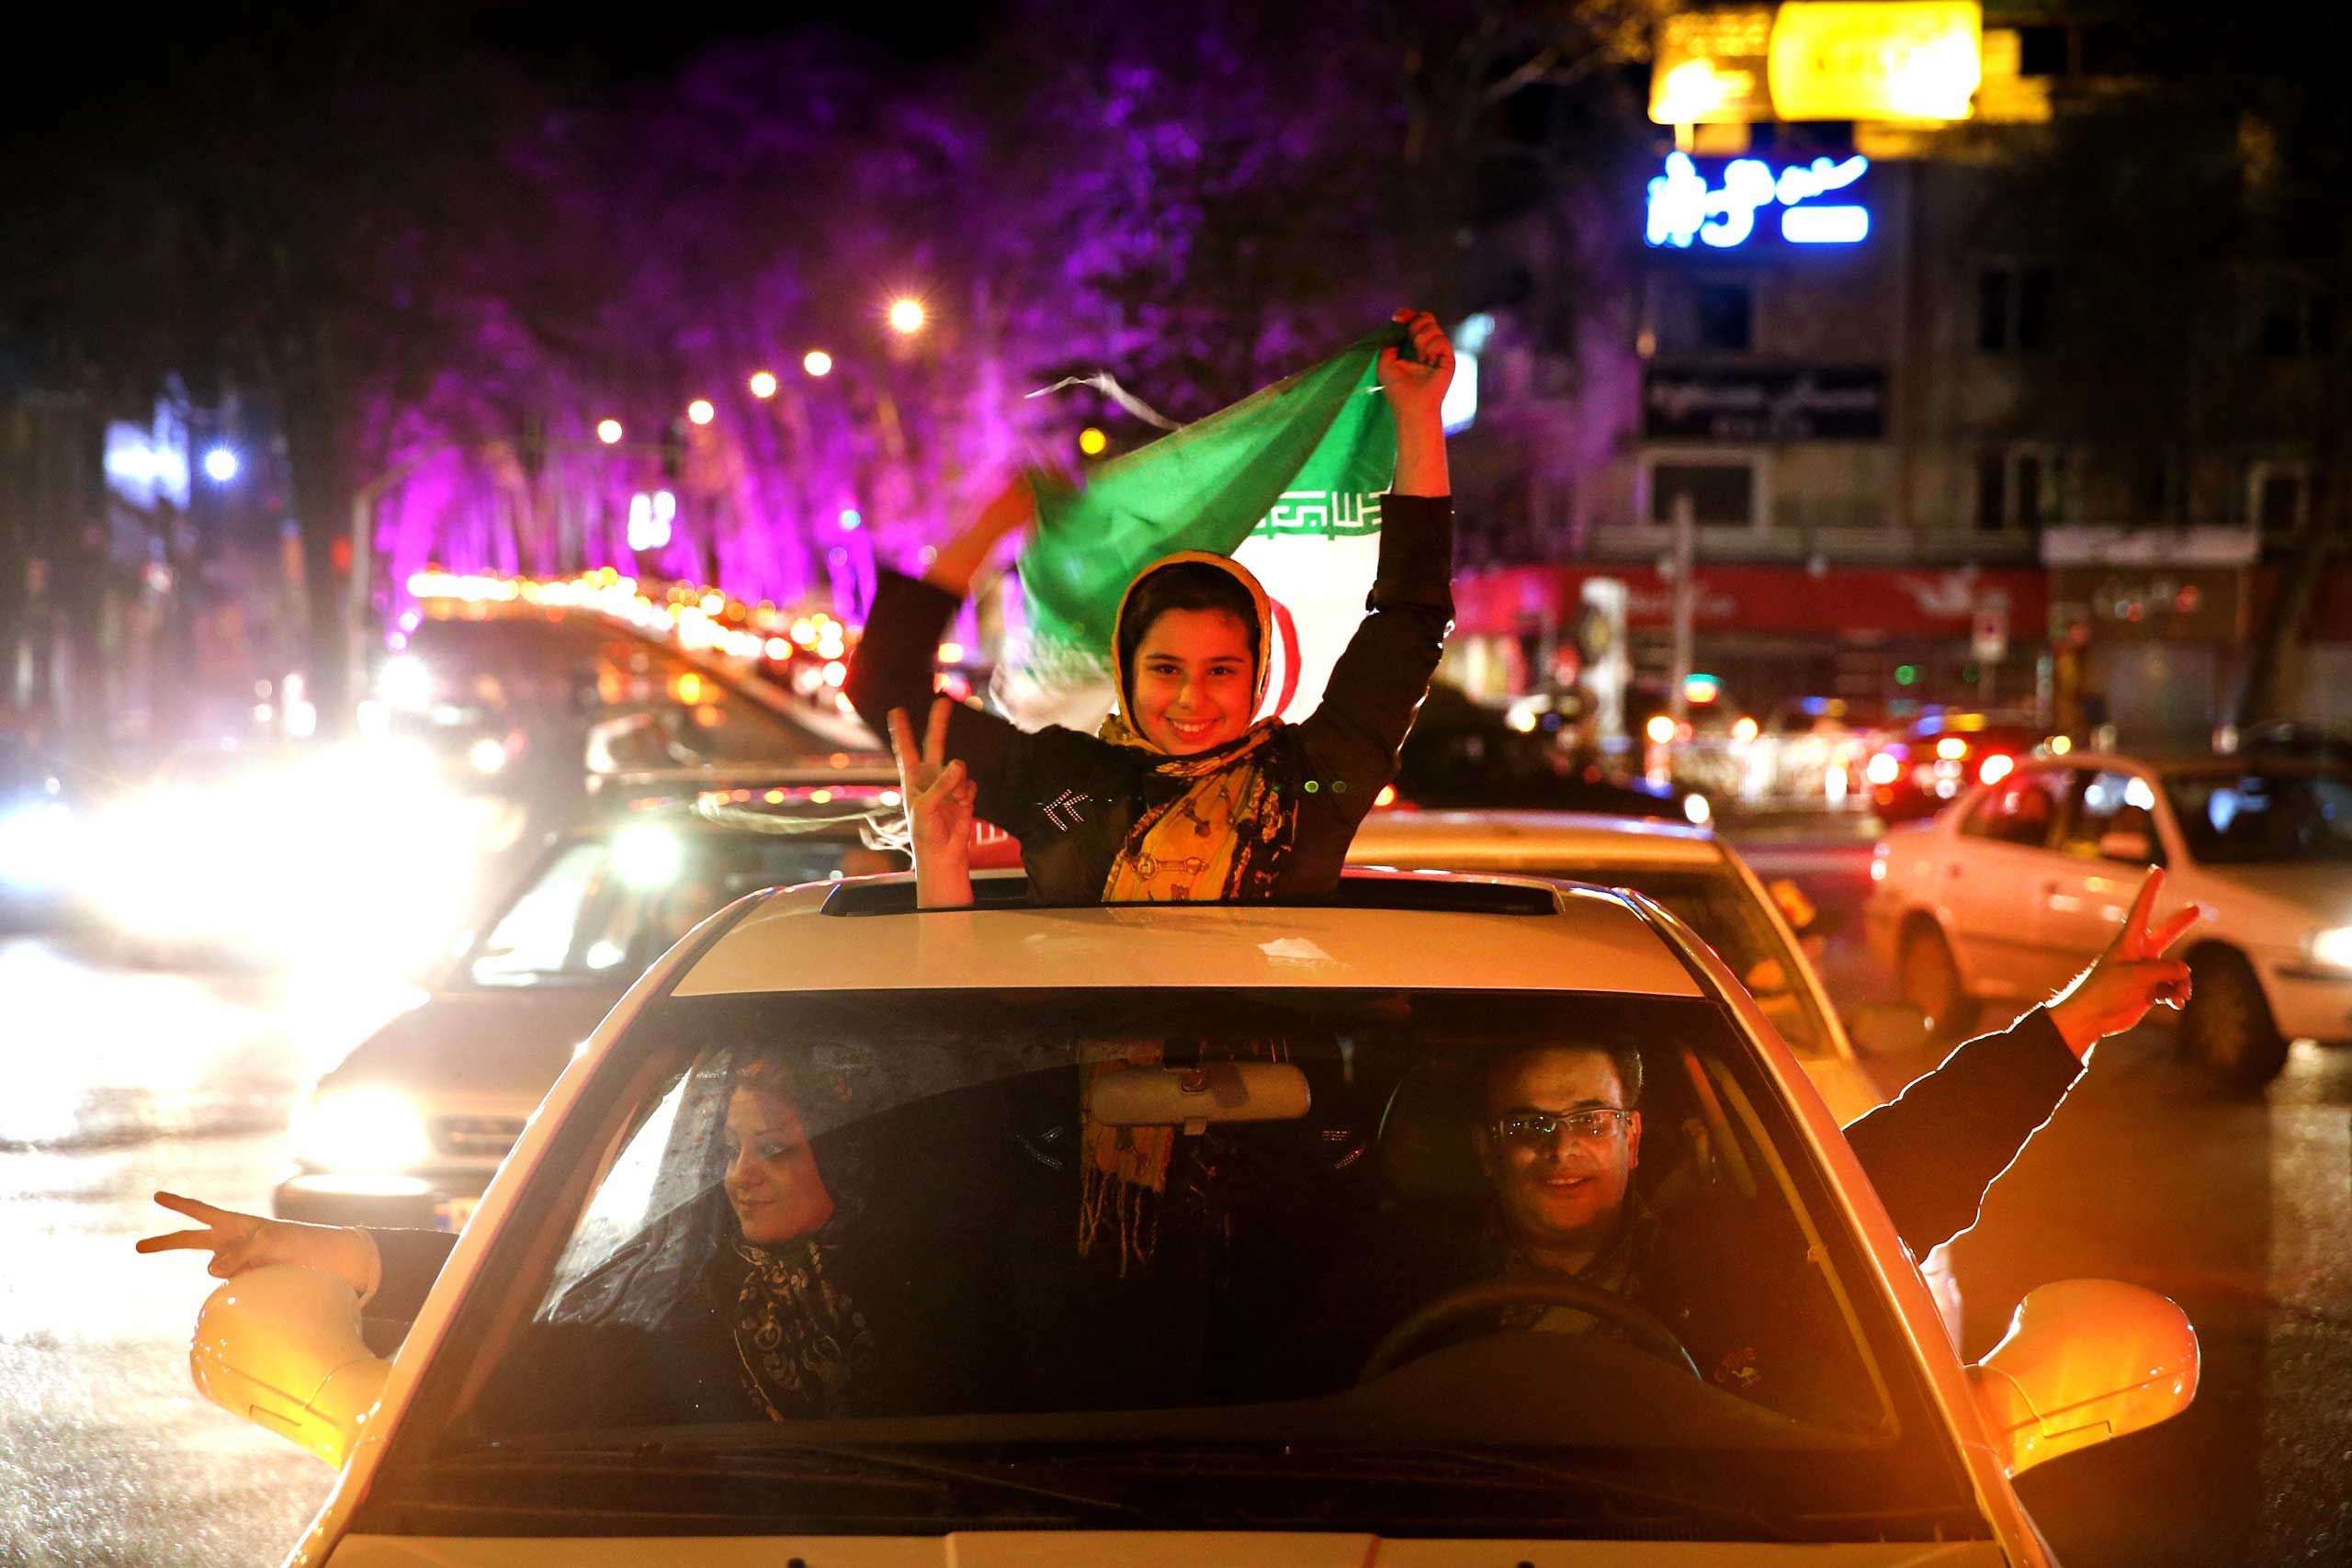 Iranians celebrate Iran's nuclear agreement with world powers on a street in northern Tehran, Iran, on Thursday, Apr. 2, 2015.